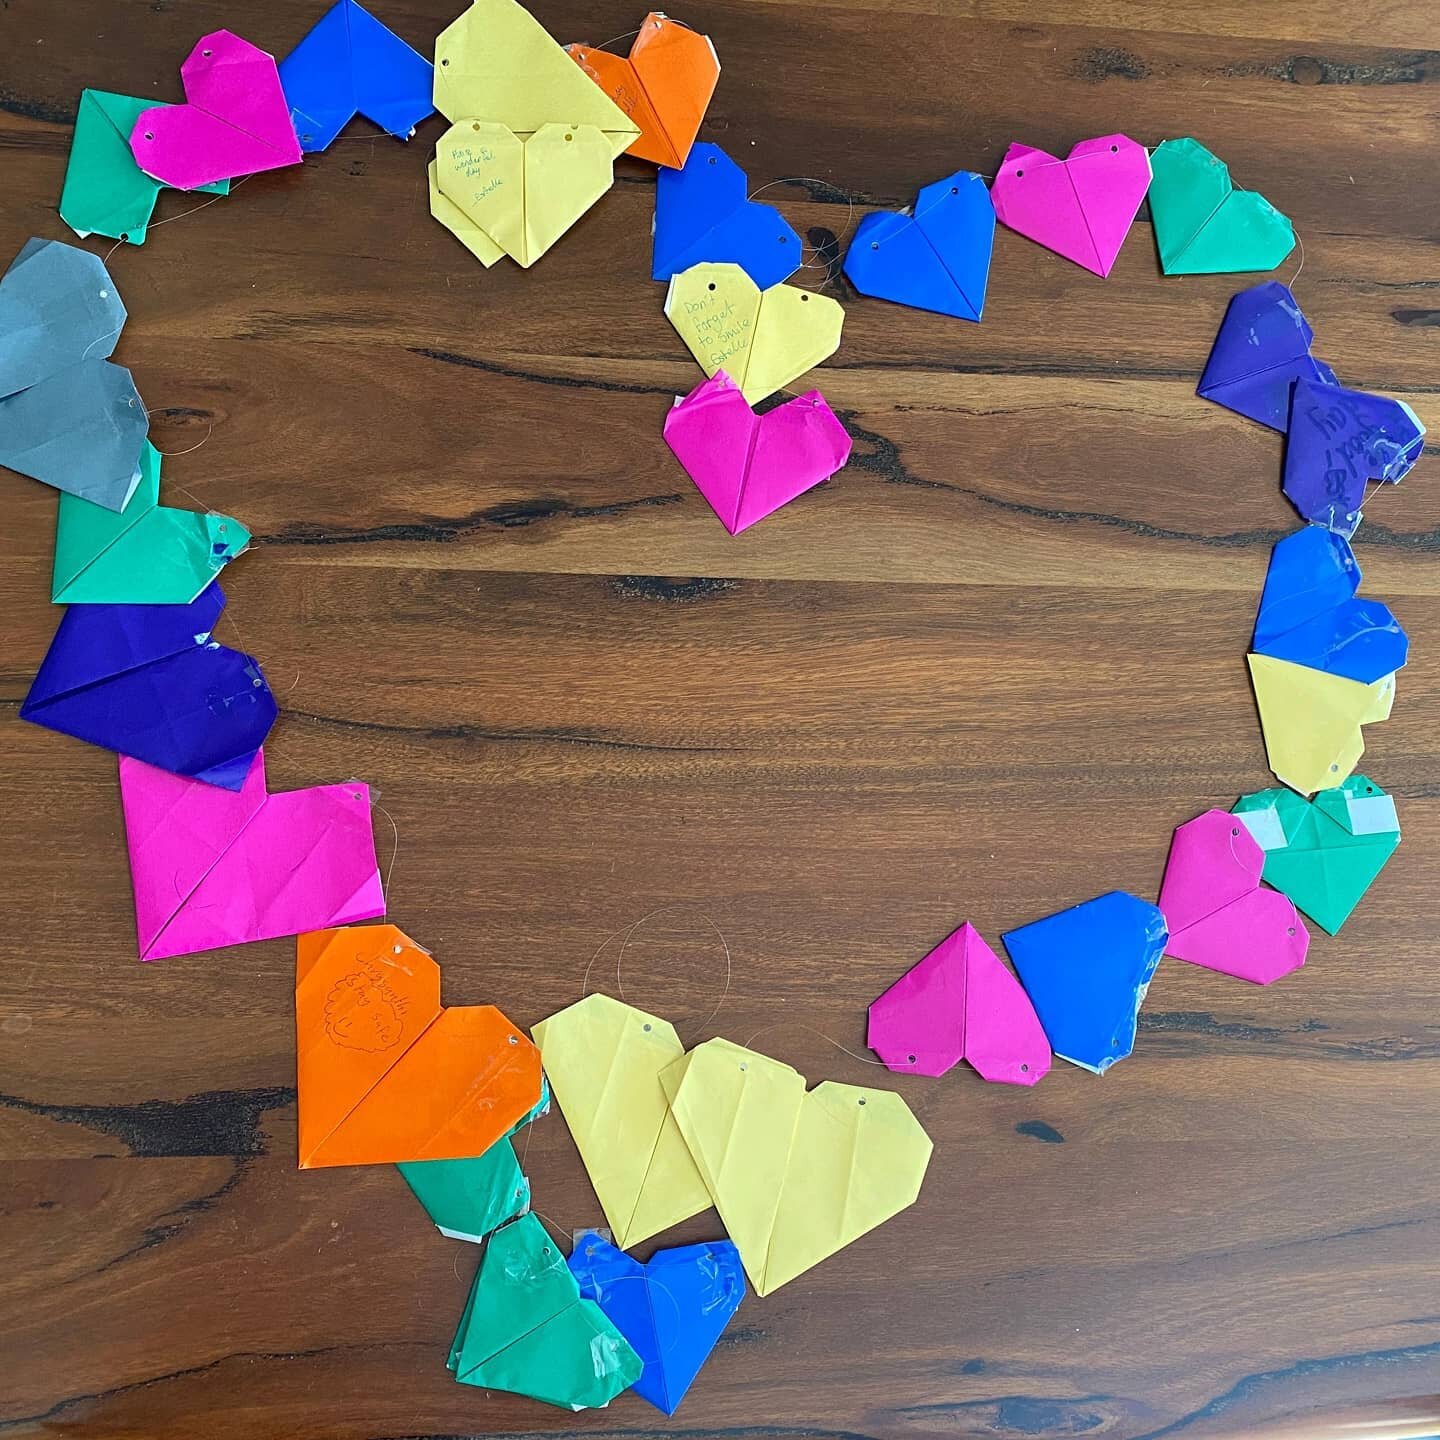 #communitylinks⠀
⠀
The Year 6 Community Leaders organised origami heart garlands for the residents of Oak Towers Aged Care in Oakleigh. Students across the school made these hearts on the Feast of the Sacred Heart. ❤️⠀
⠀
#shoakleigh #sacredheartoakle